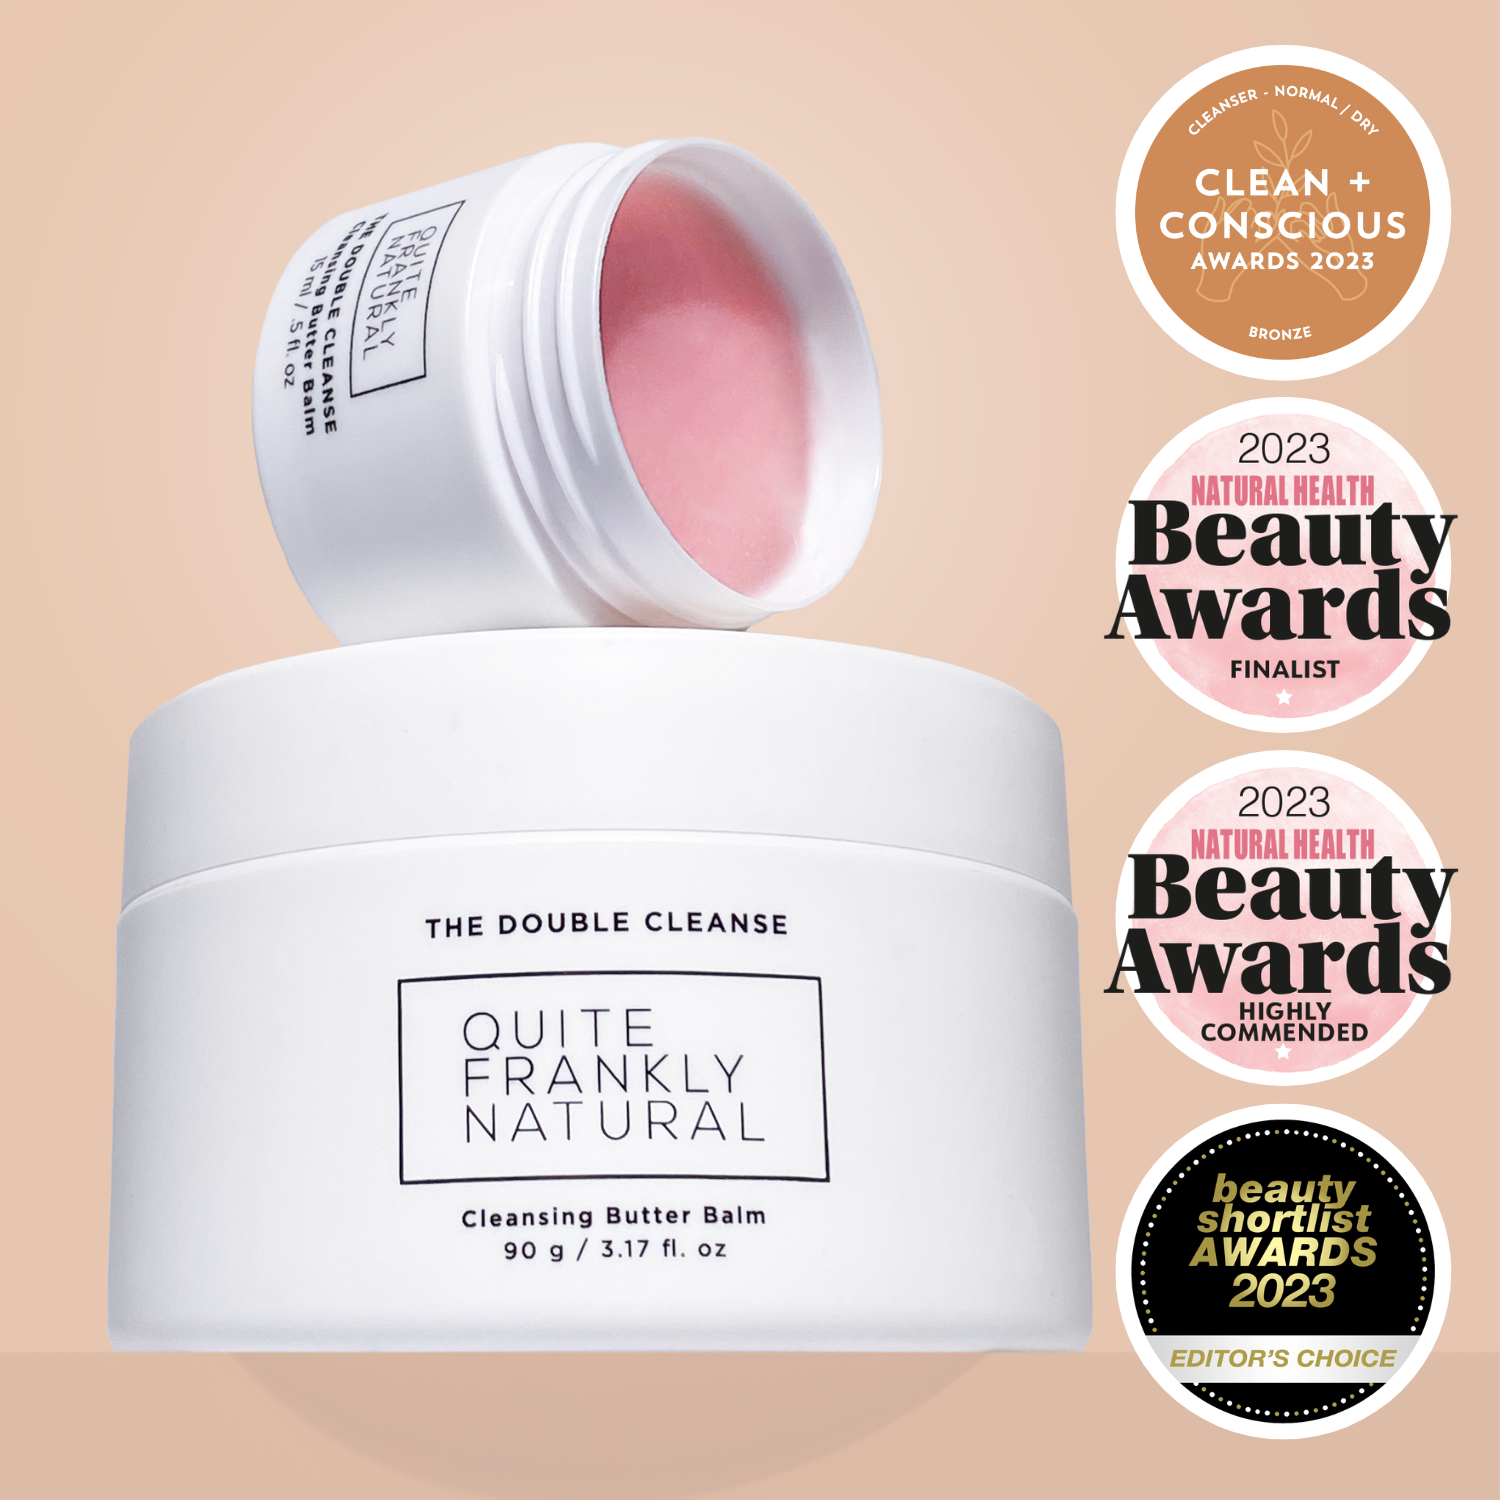 THE DOUBLE CLEANSE - CLEANSING BUTTER BALM